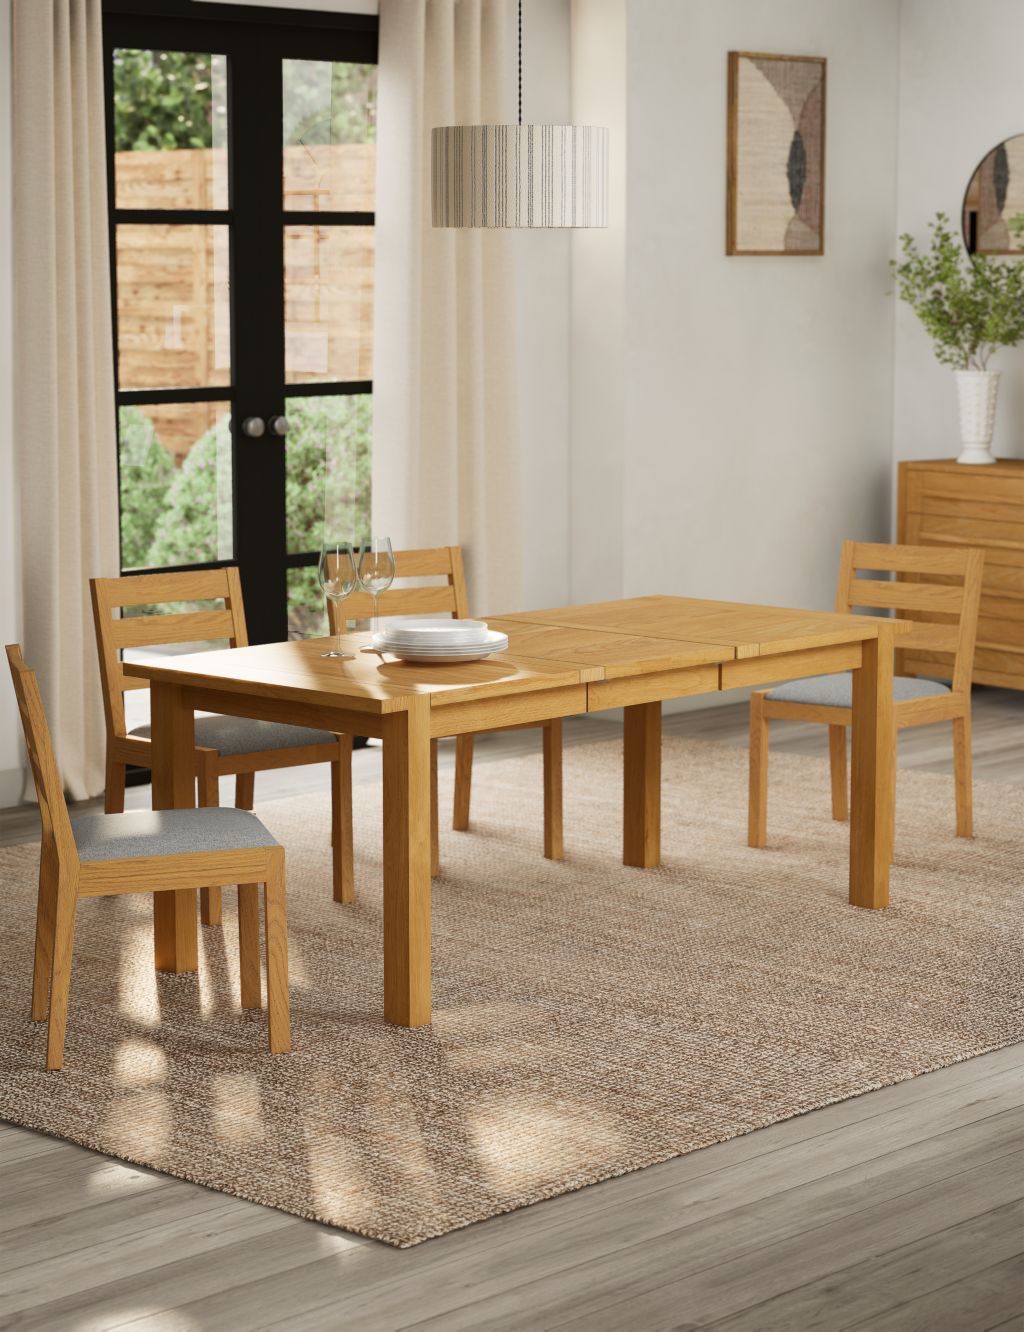 Sonoma™ 6-8 Seater Extending Dining Table image 1